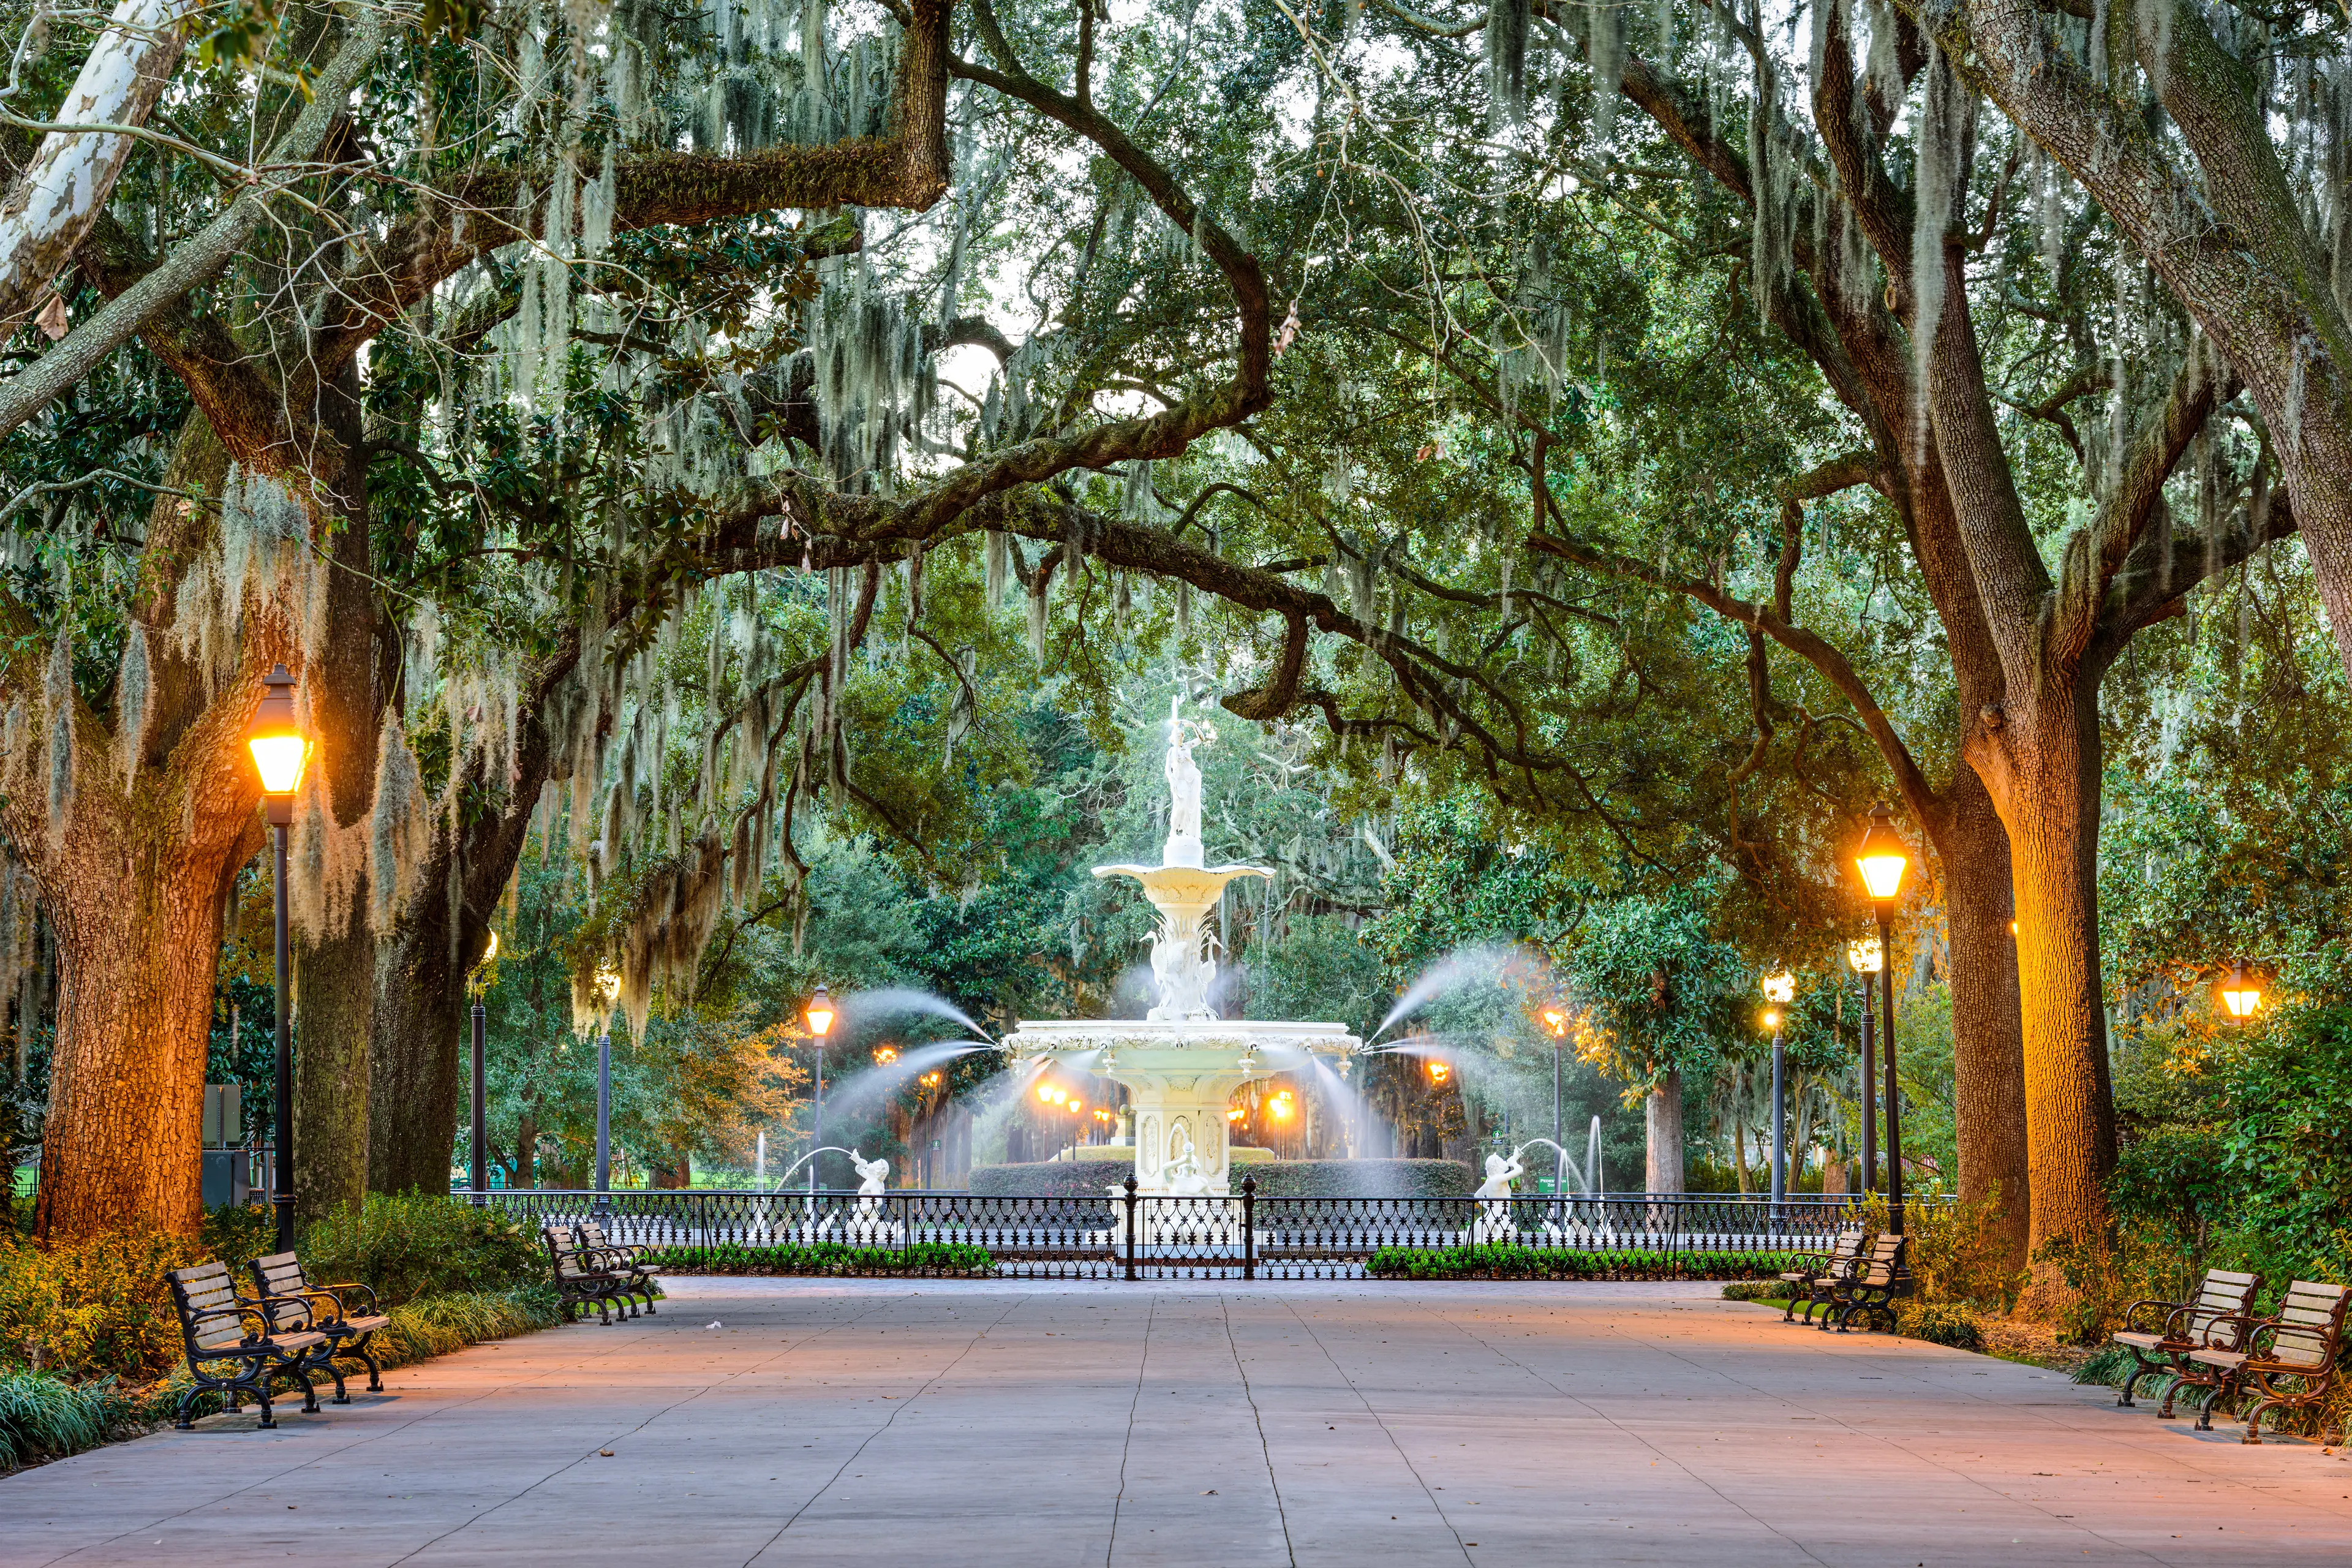 2-day Relaxing and Sightseeing Adventure in Hidden Savannah, Georgia